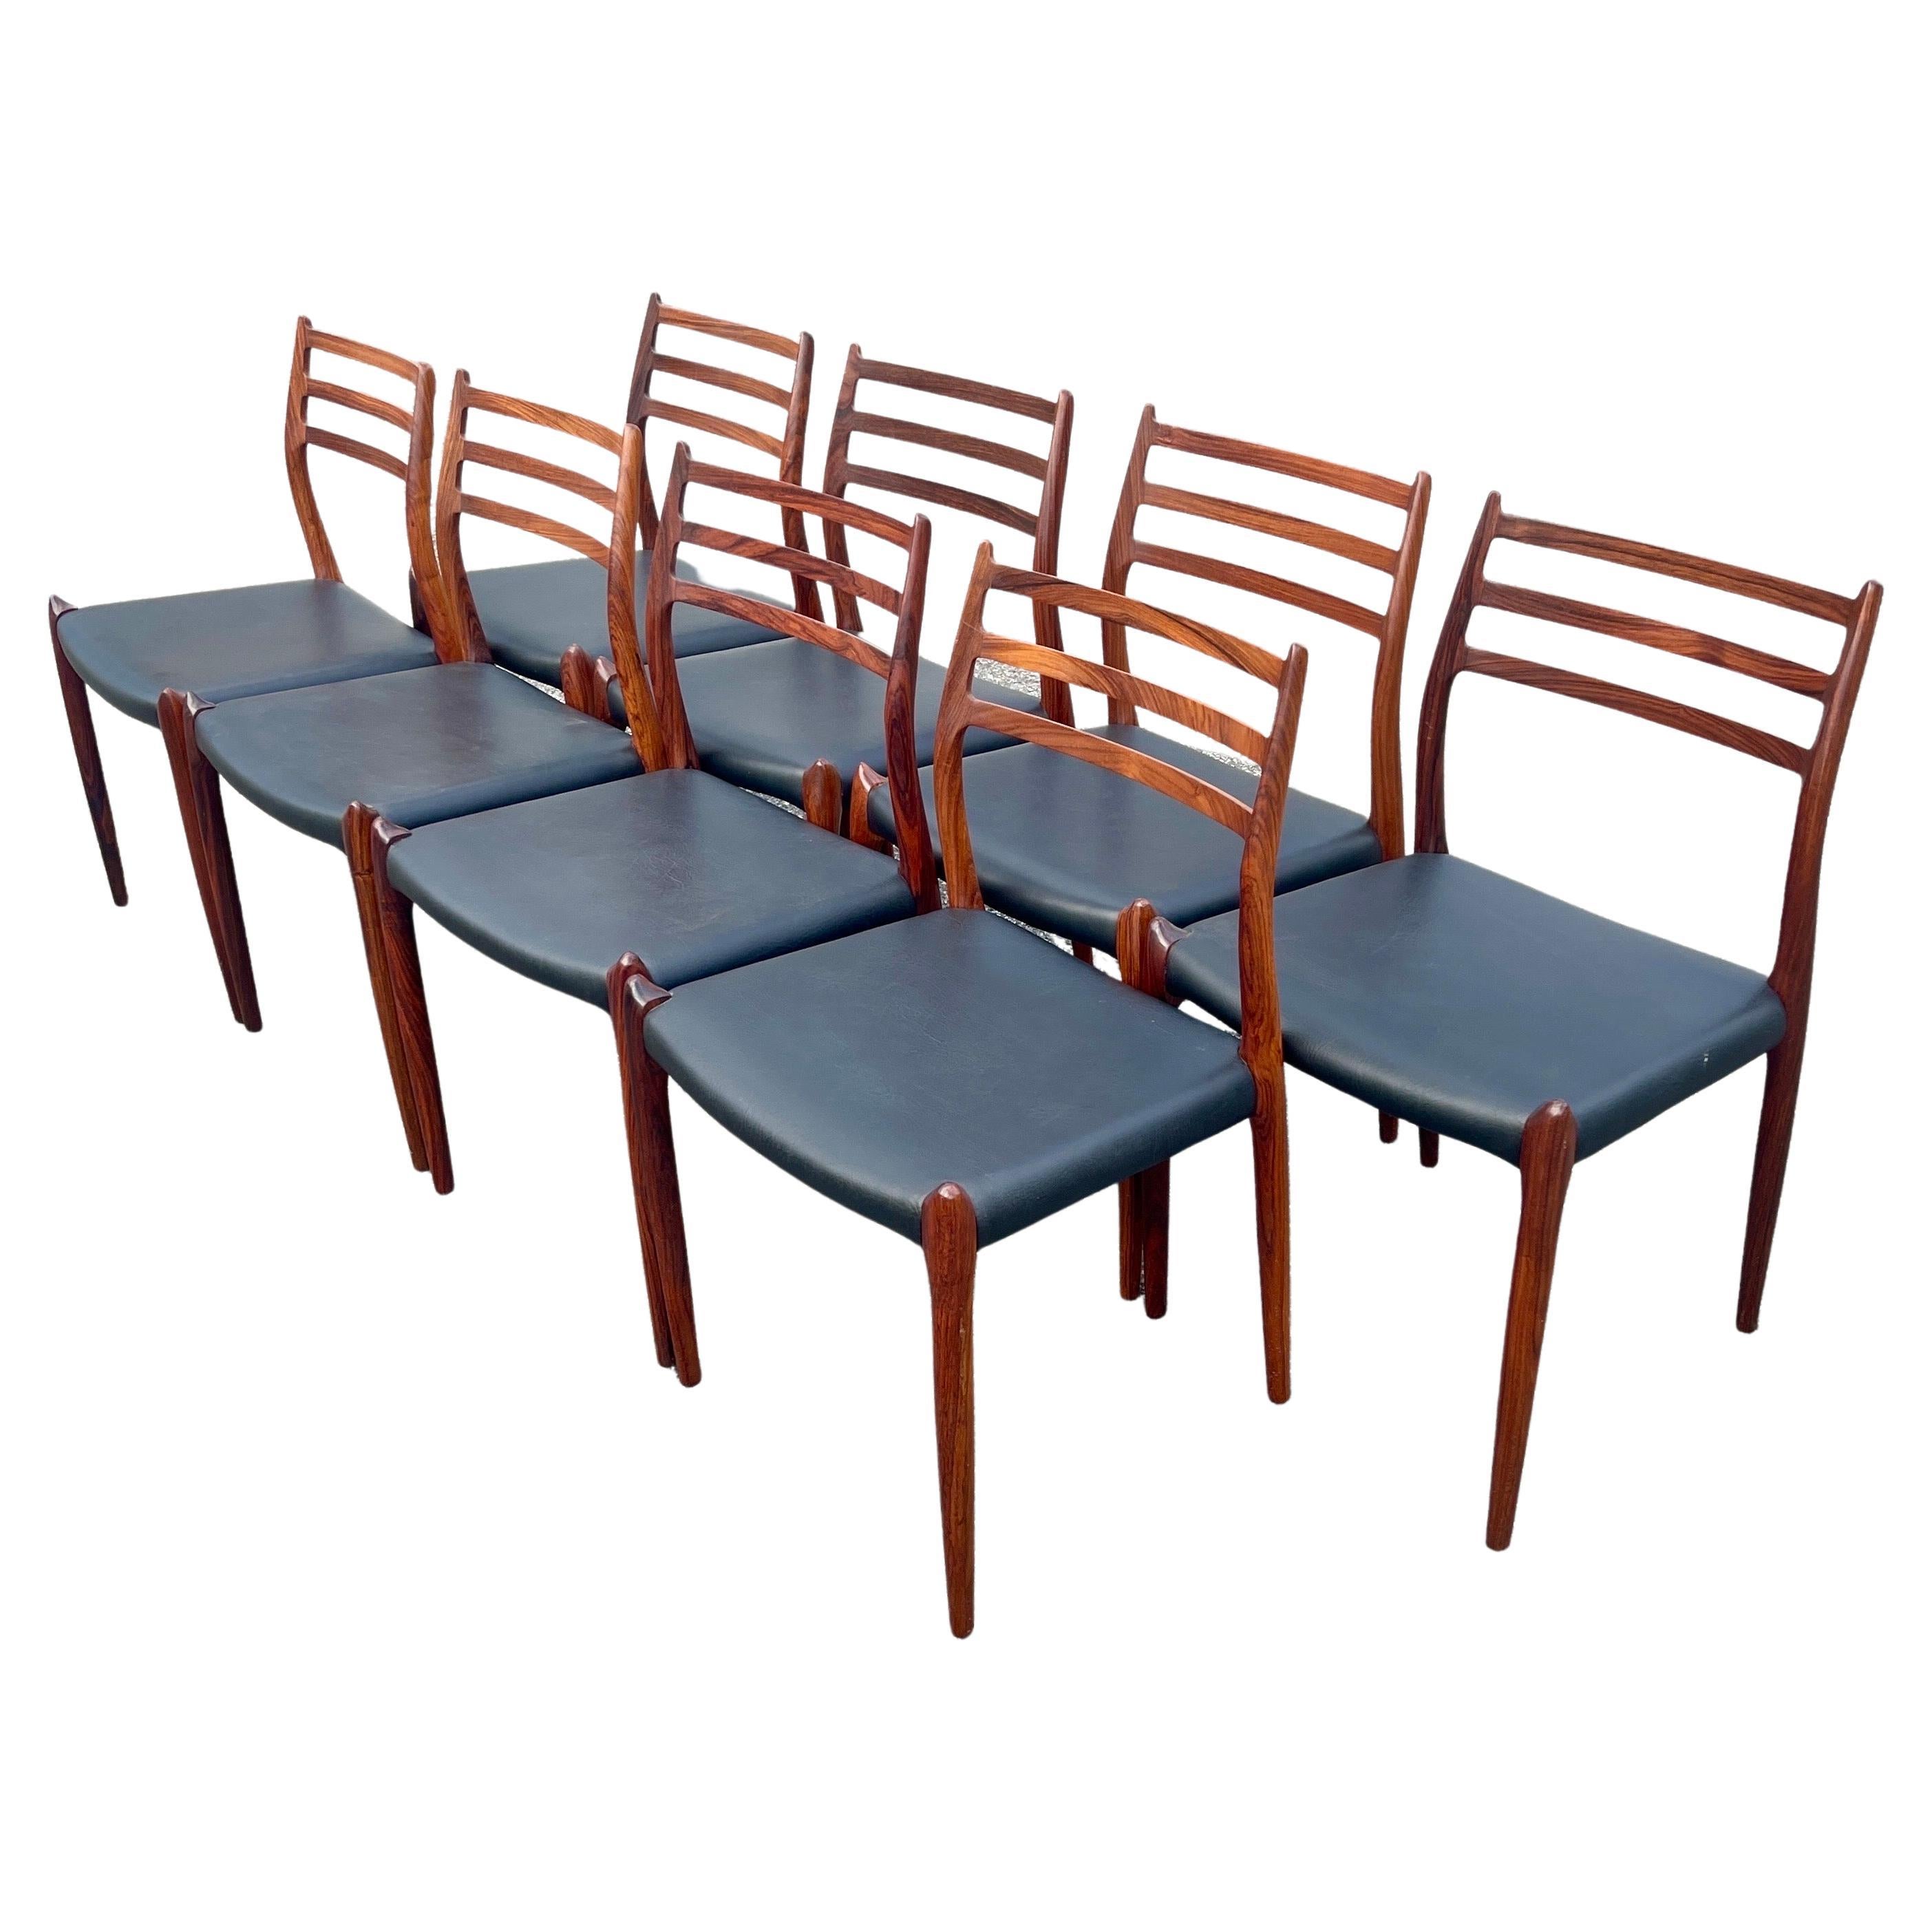 Experience the beauty and craftsmanship of mid-century design with this set of 8 Niels Moller Model 78 rosewood side chairs. Produced by JL Moller, these chairs are the most sought-after of their kind, featuring a distinctive and attractive design